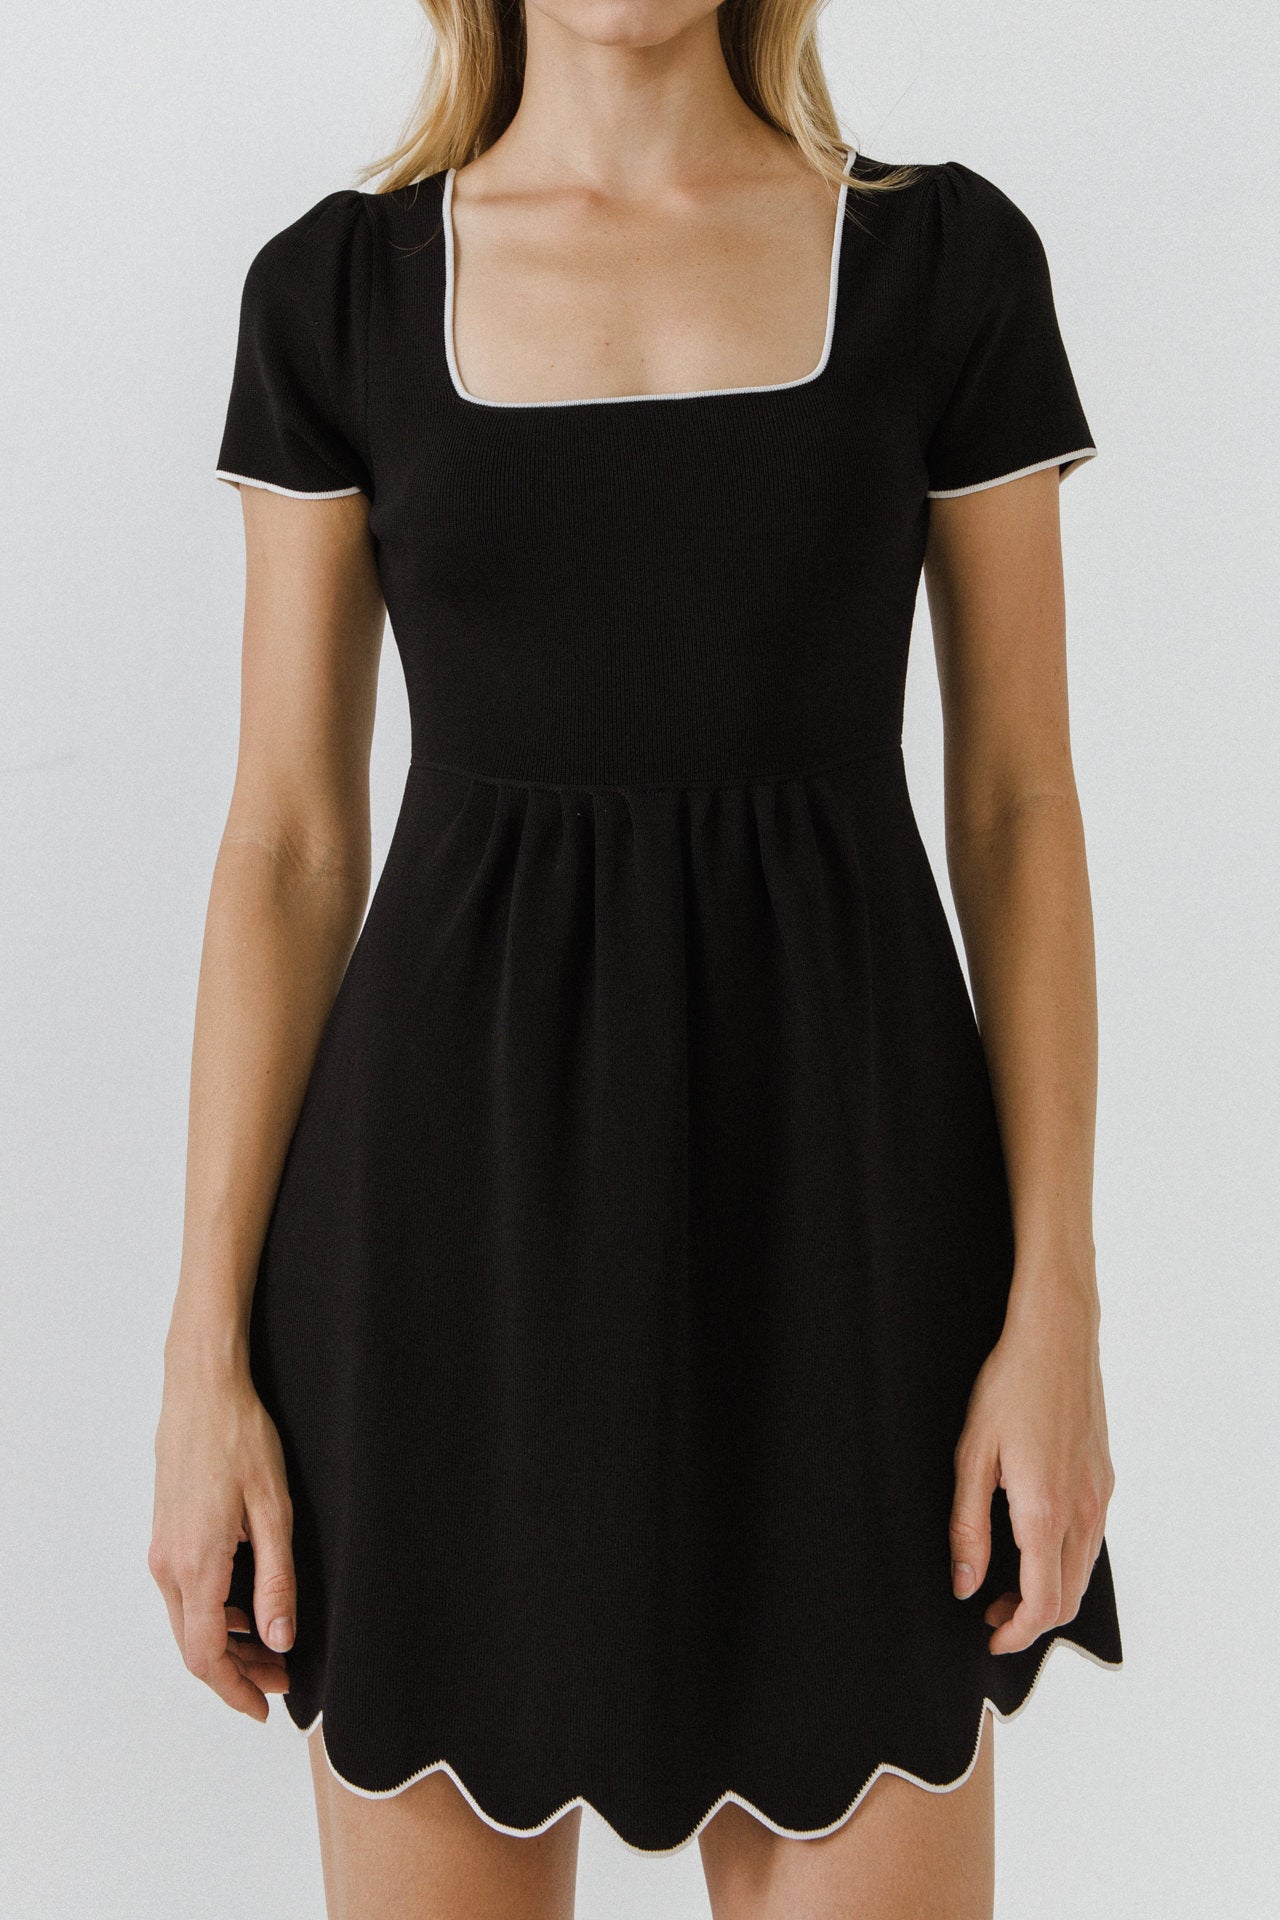 ENGLISH FACTORY - Scallop Contrast Detail Knit Dress - DRESSES available at Objectrare